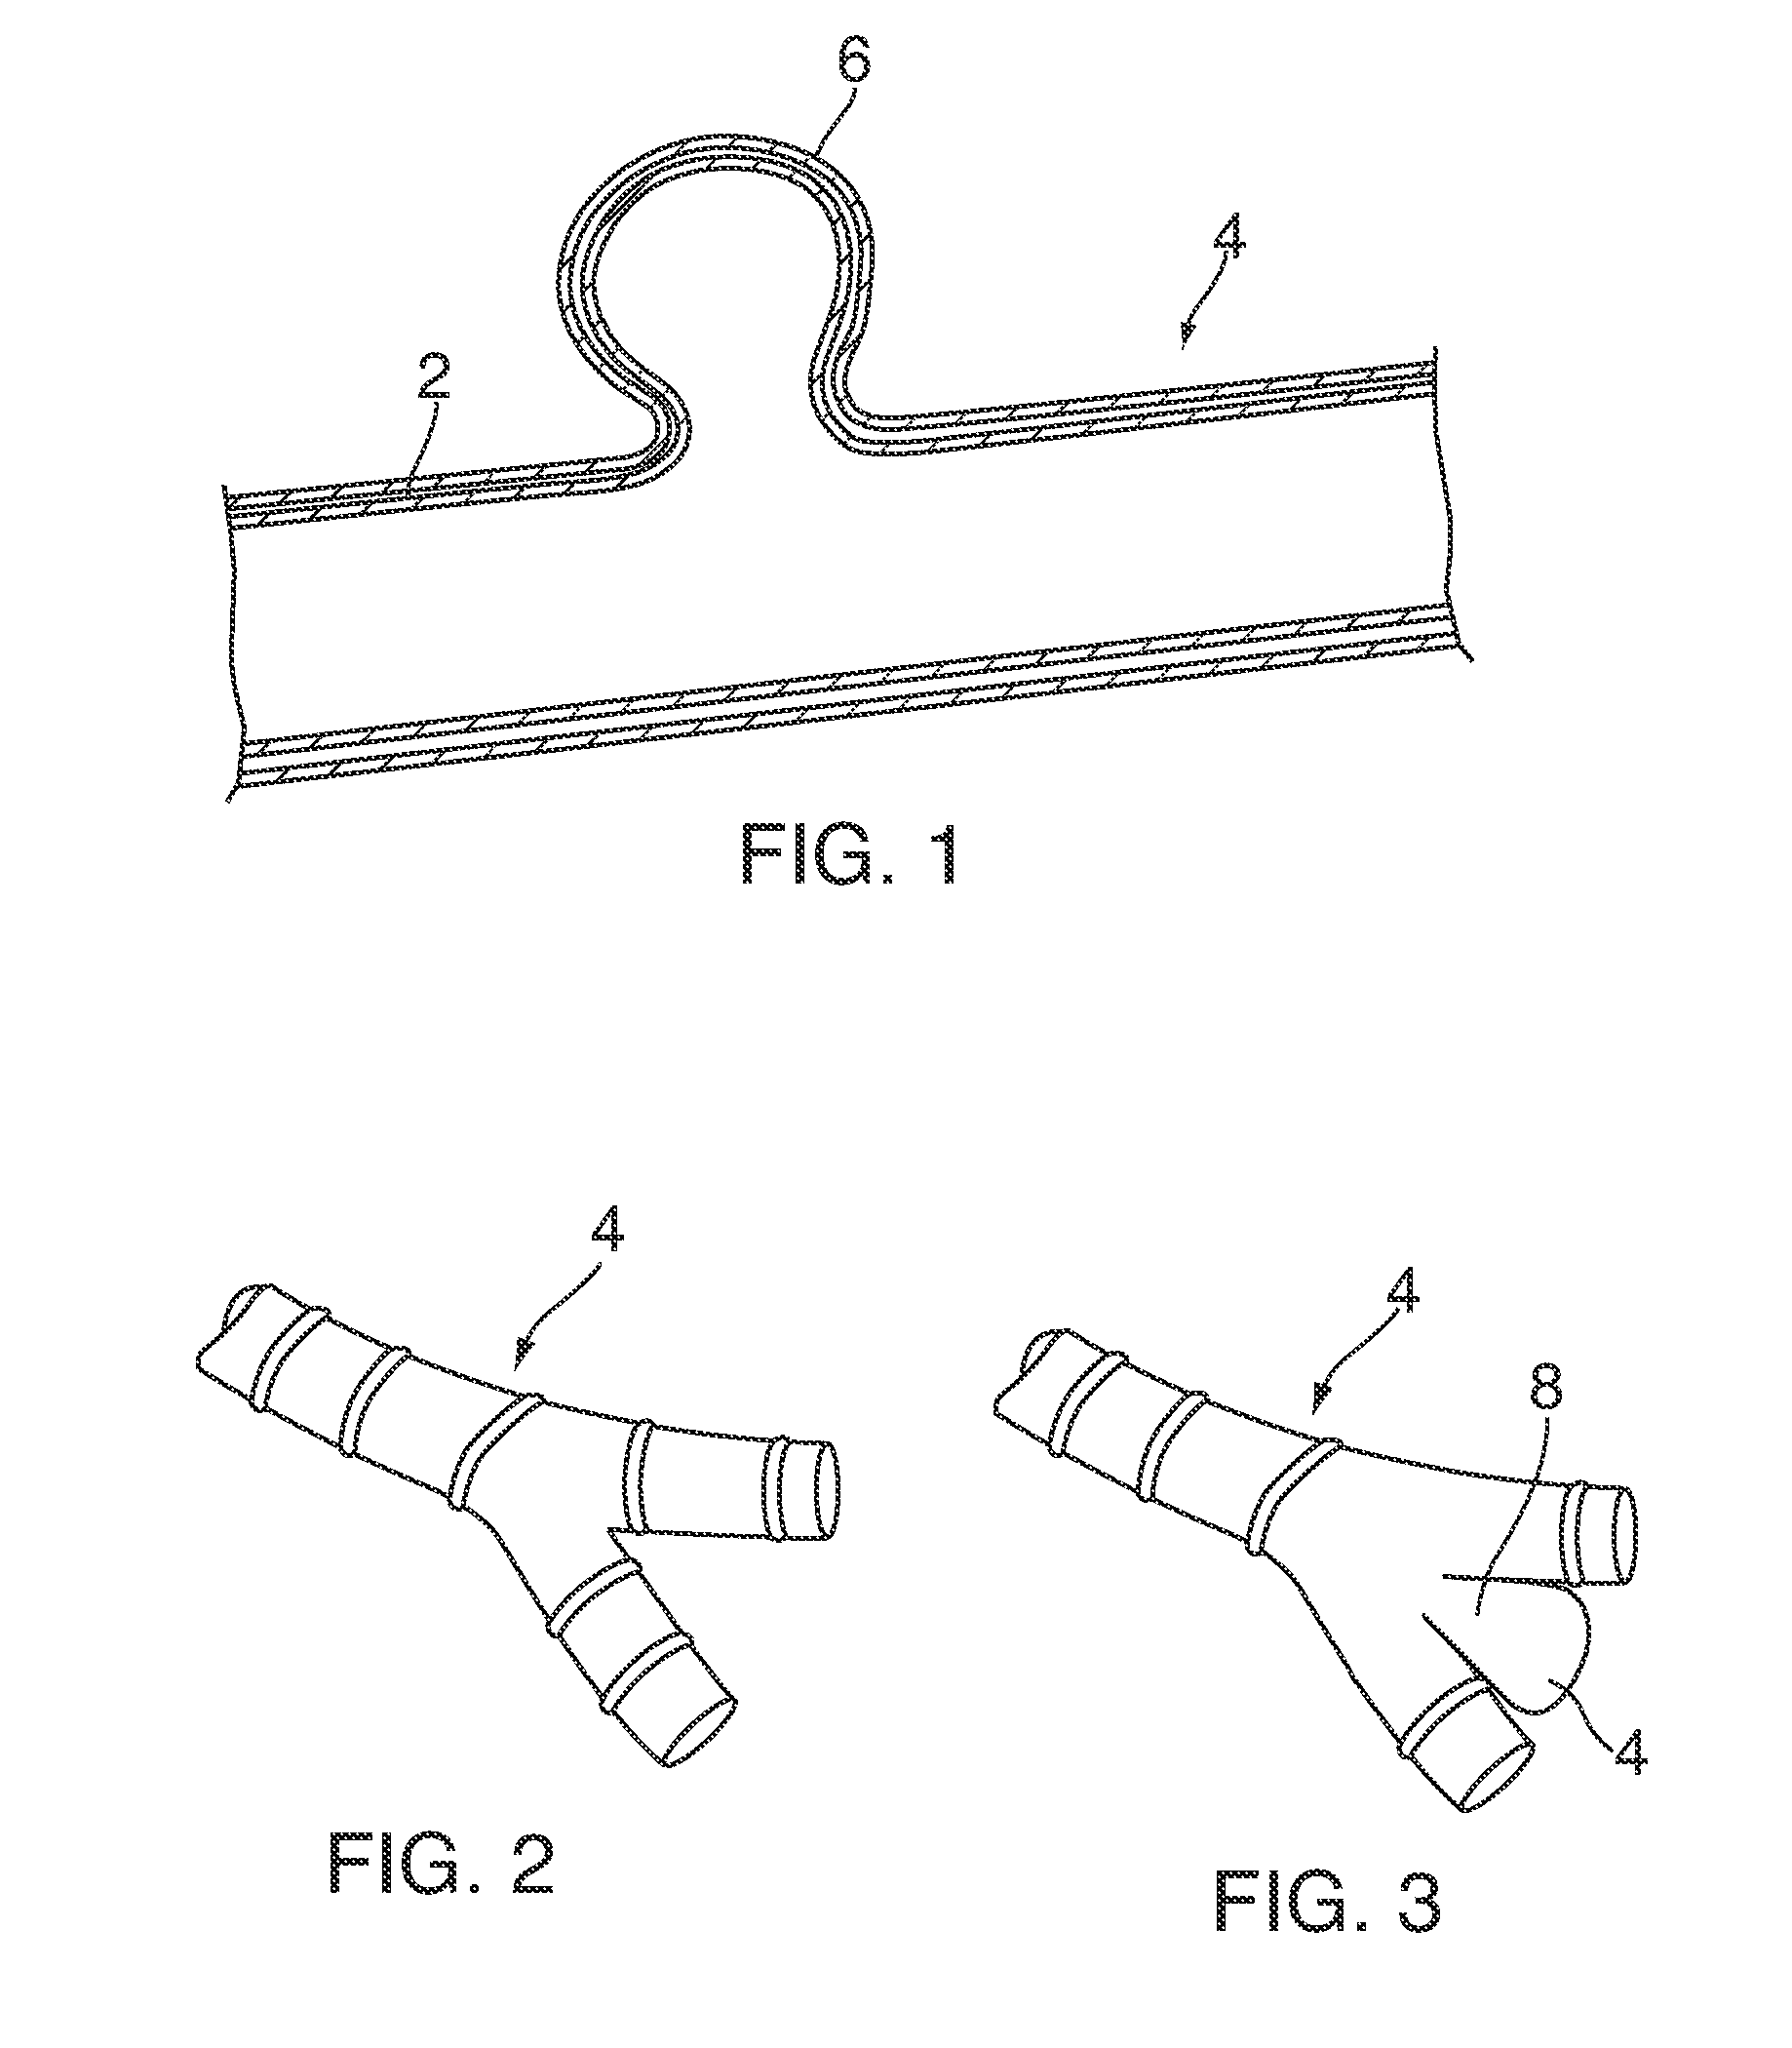 Vascular occlusion devices and methods